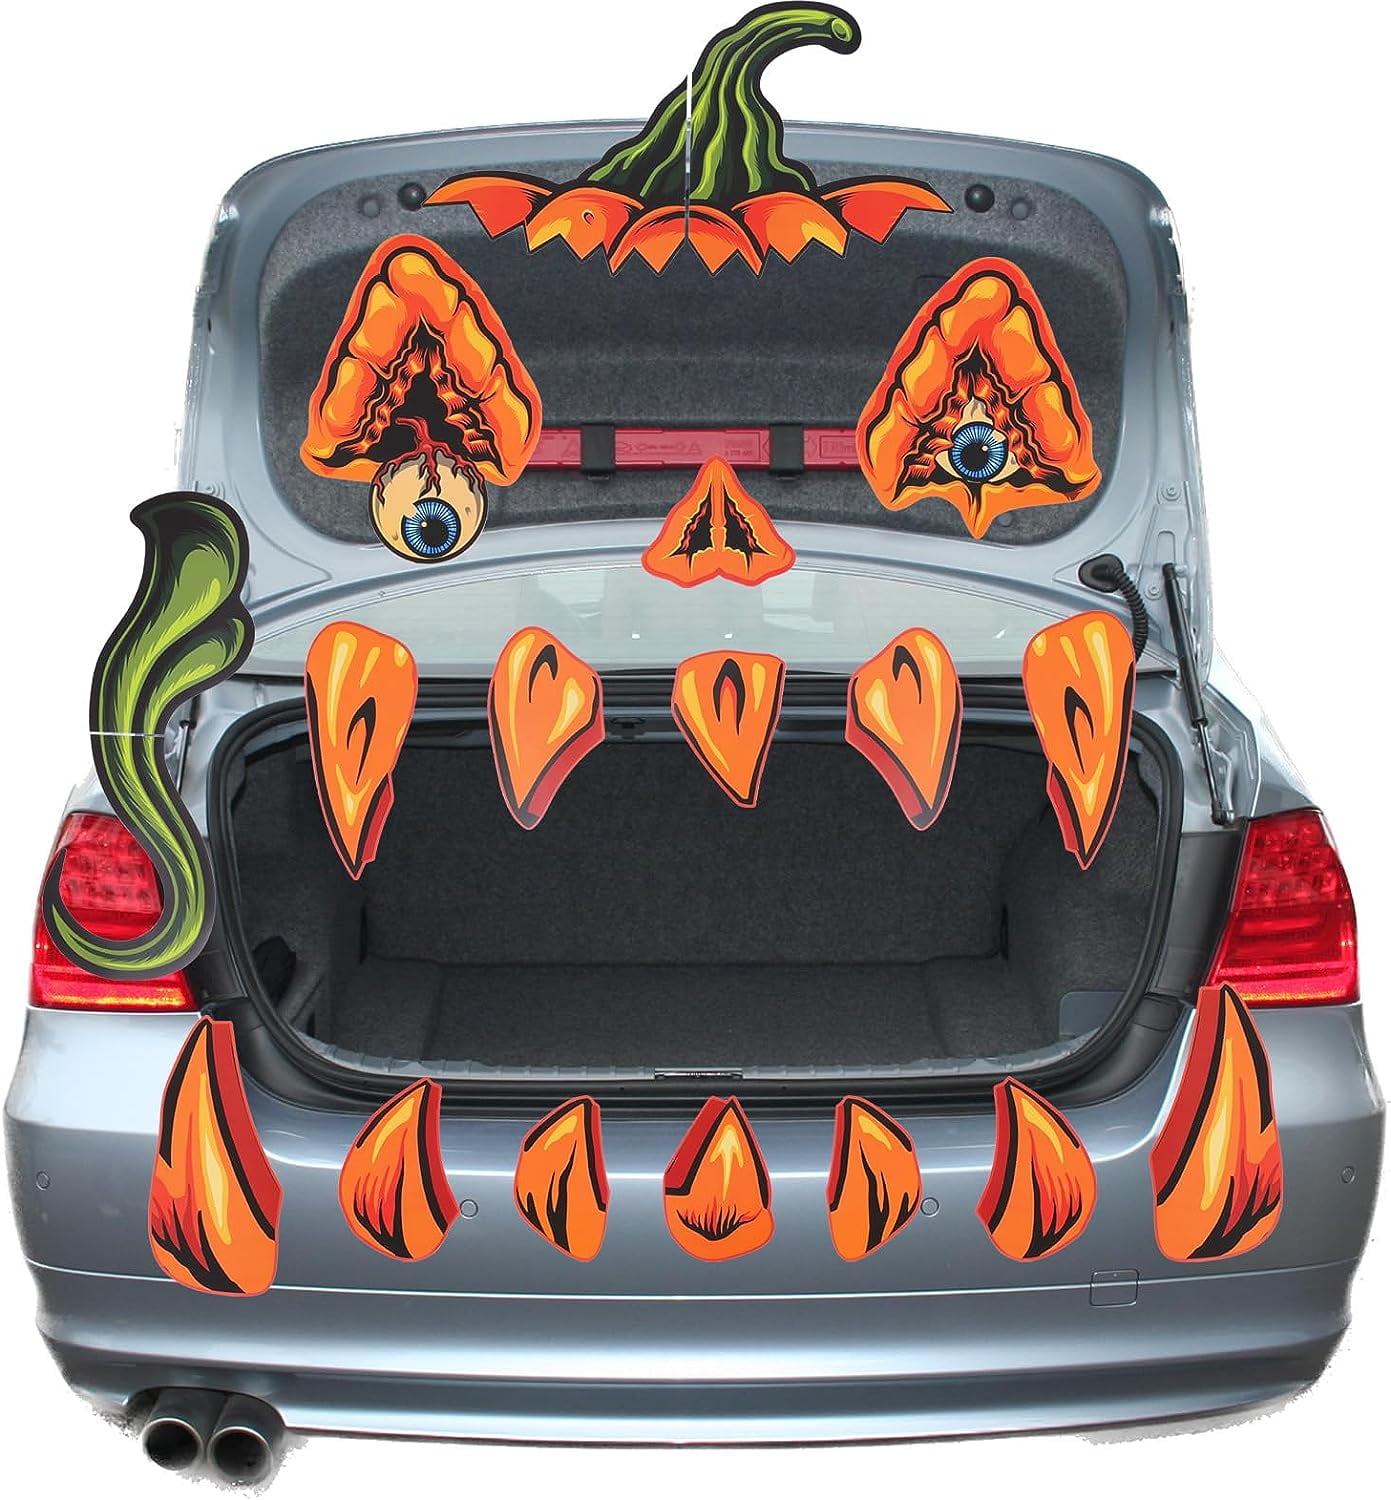 POILKMNI Trunk or Treat Car Decorations Kit, Halloween Dalmatians Dog  Decorations for Car & SUV, Outside Garage Archway Door Haunted House Car